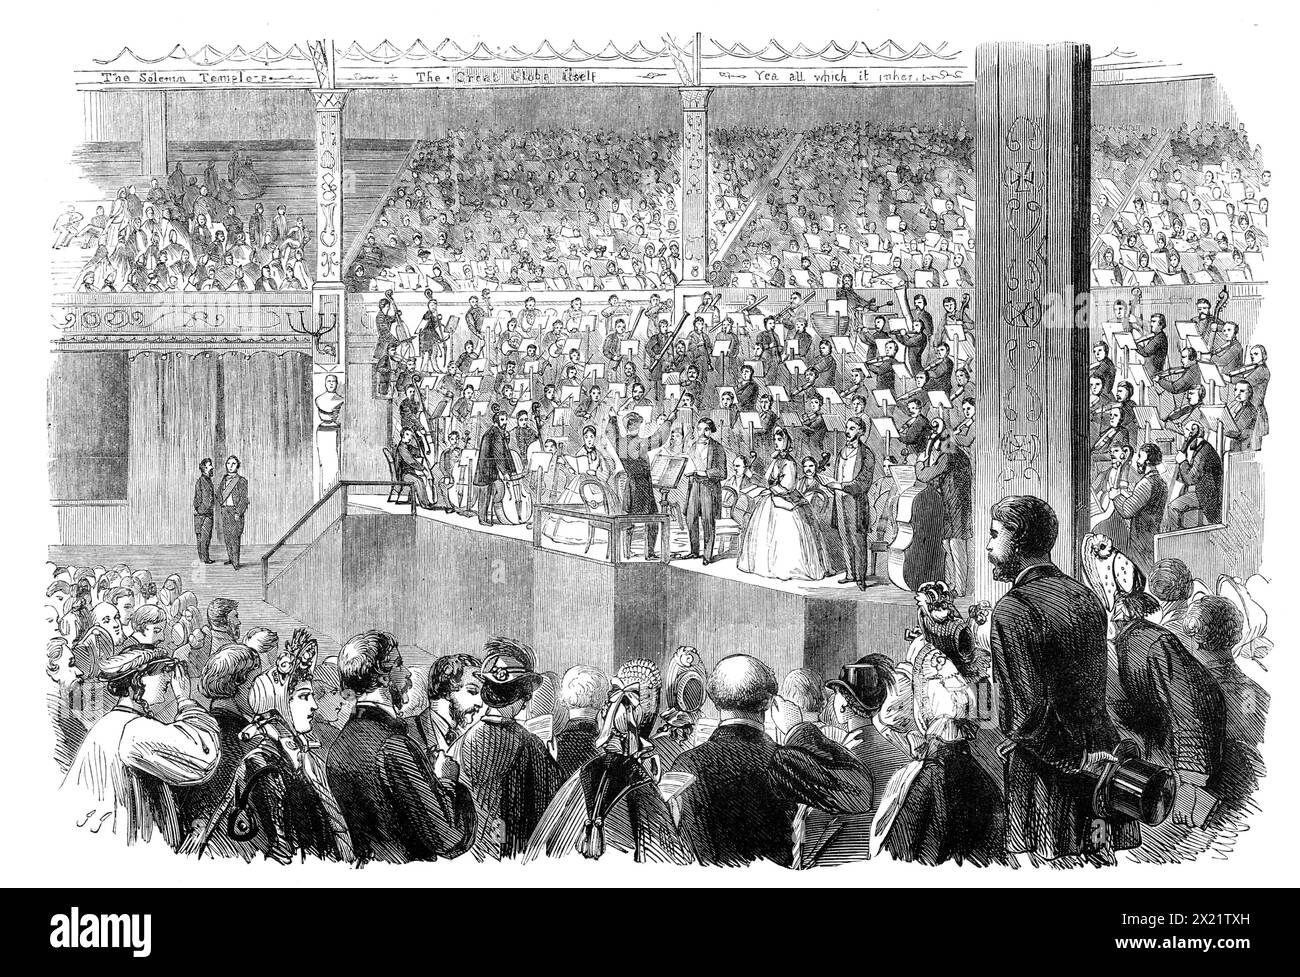 The Shakspeare Commemoration at Stratford-On-Avon: performance of the oratorio, &quot;The Messiah&quot;, in the Festival Pavilion, 1864. Celebrating the tercentenary of William Shakespeare's birth. 'View of the interior of the...building when used as a concert-room during the performance of Handel's oratorio &quot;The Messiah&quot;.' From &quot;Illustrated London News&quot;, 1864. Stock Photo